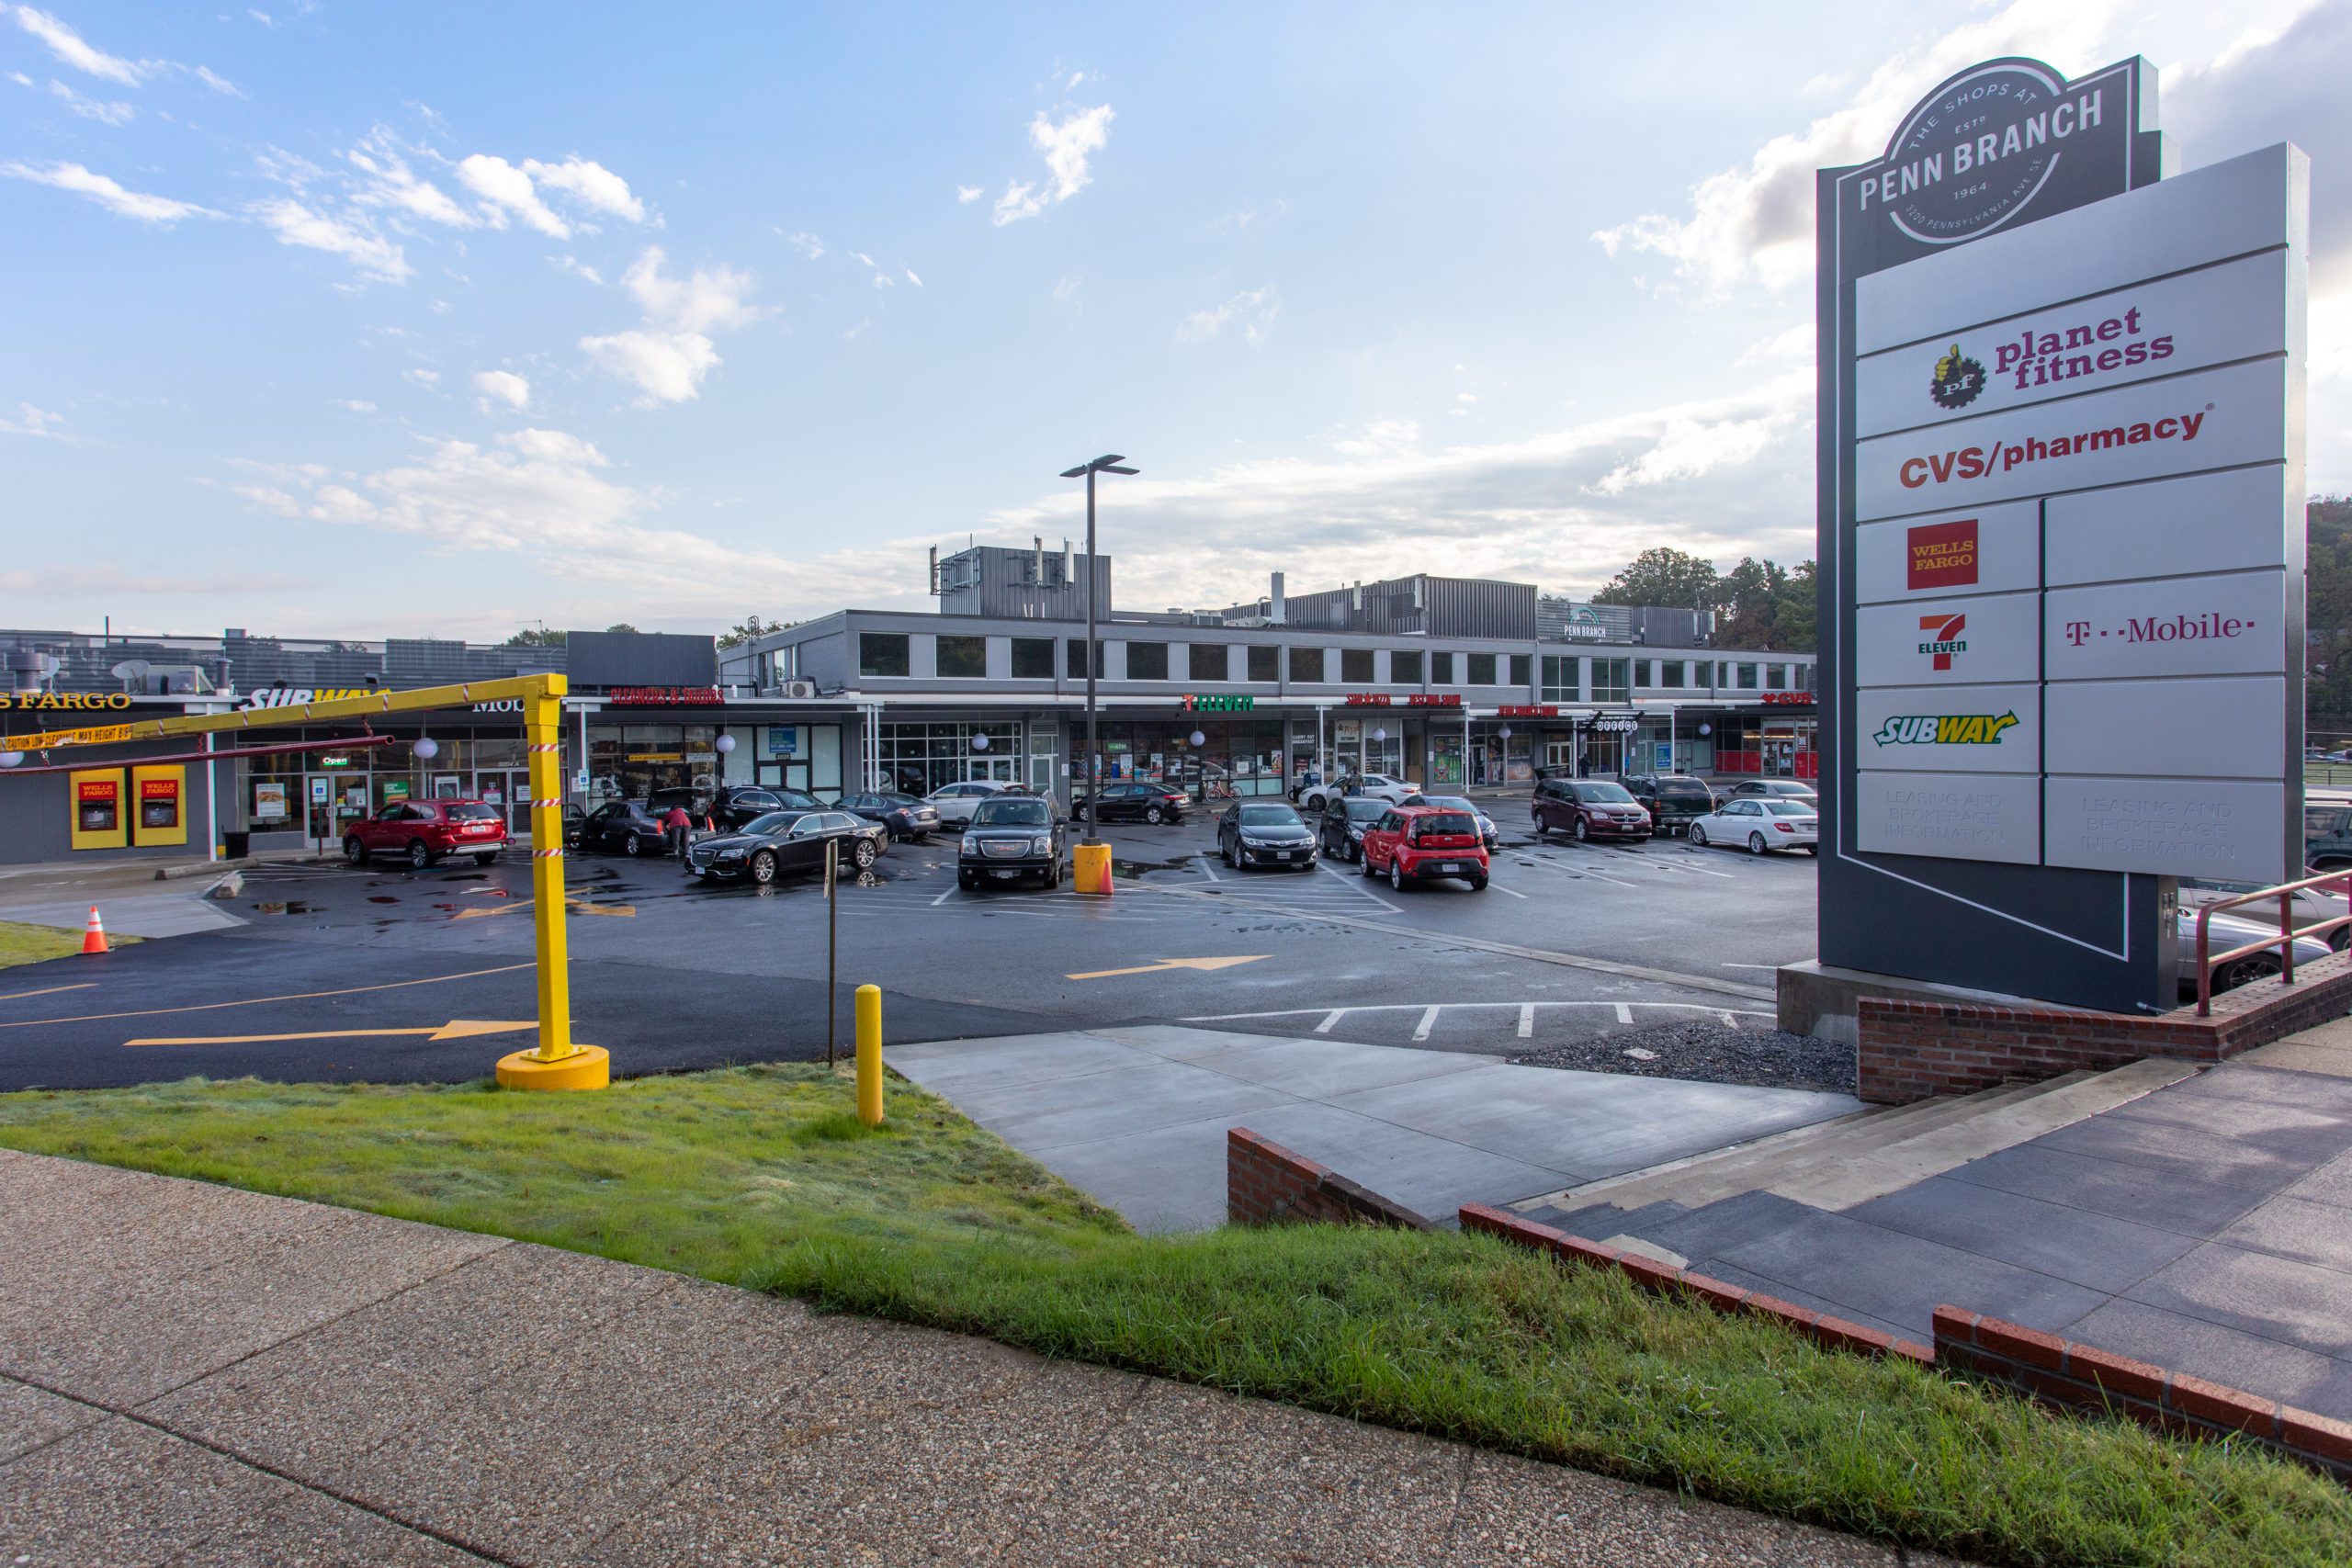 Jair Lynch Real Estate Partners & Rappaport achieve 96% Leased at newly renovated Shops at Penn Branch